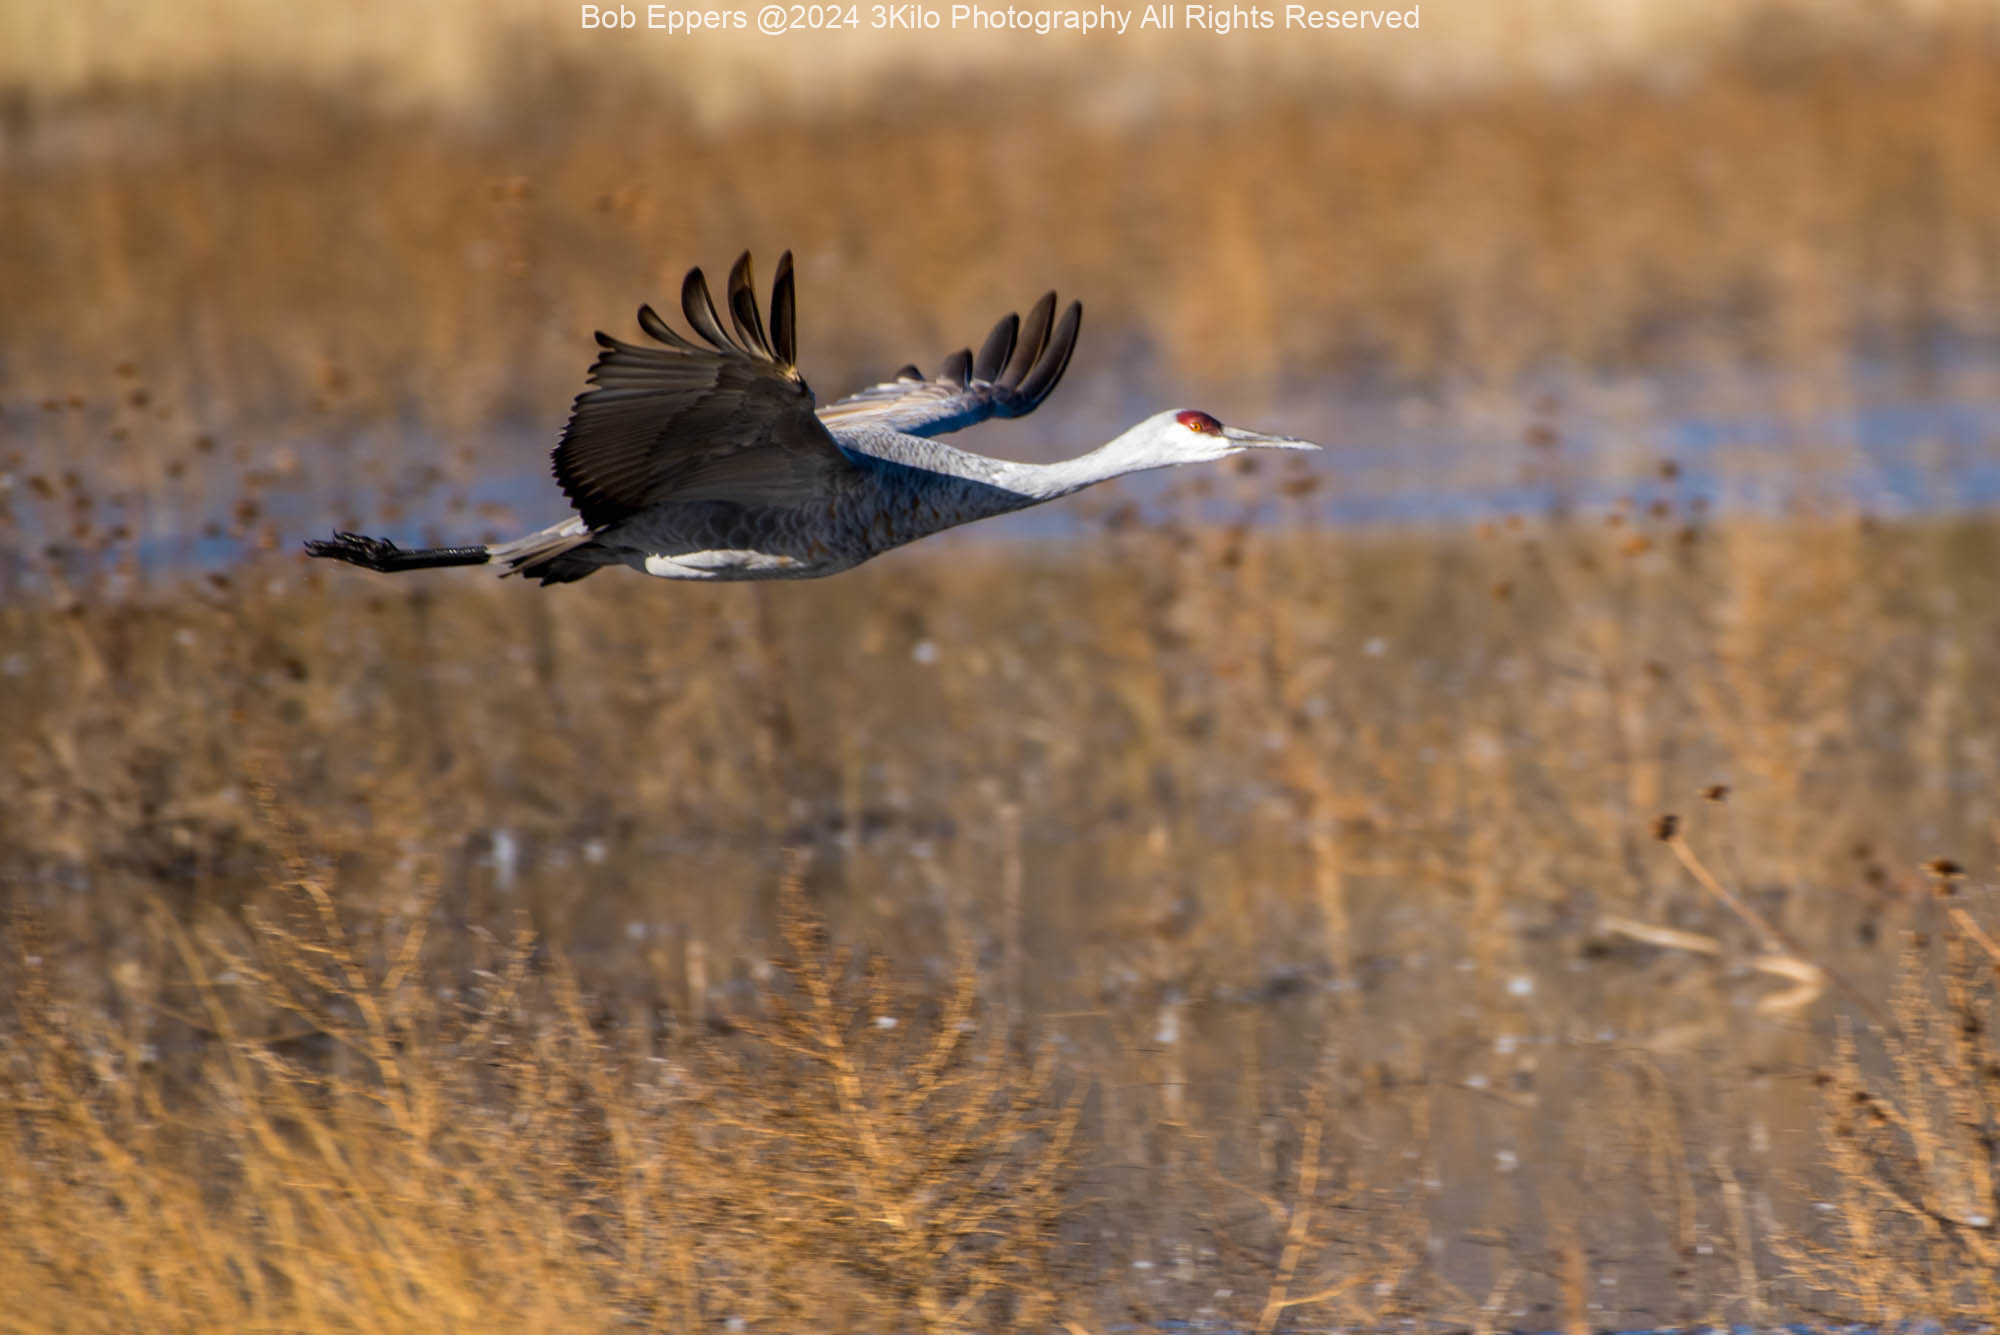 Photo of a Flying Sandhill Crane at the Bosque del Apache